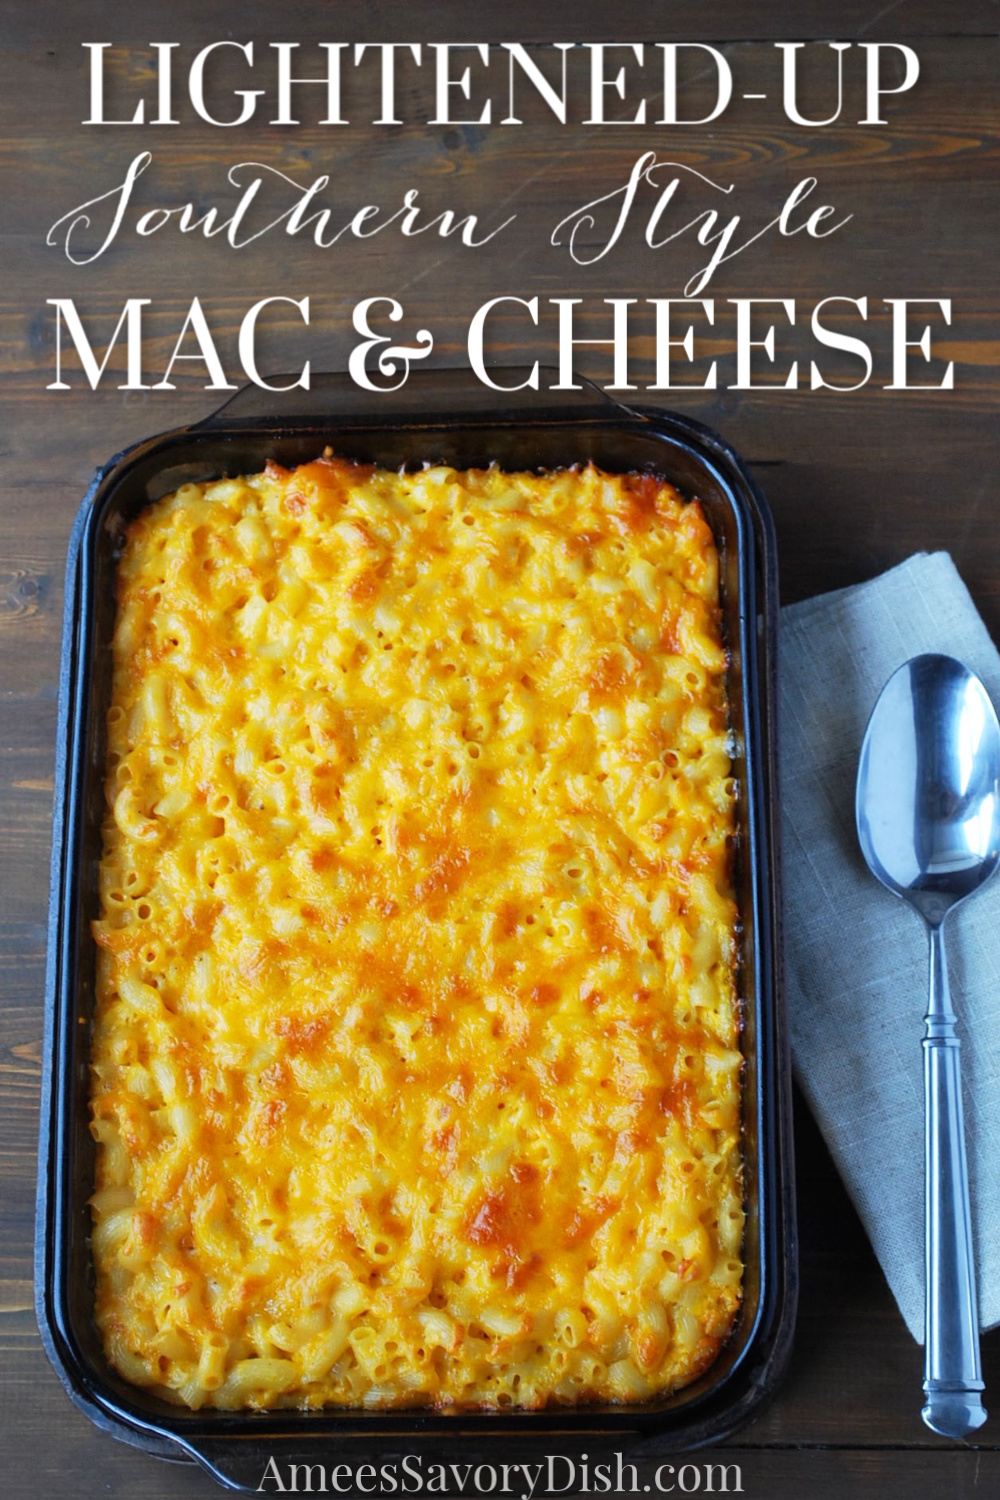 Lightened-Up Southern Macaroni and Cheese- Amee's Savory Dish